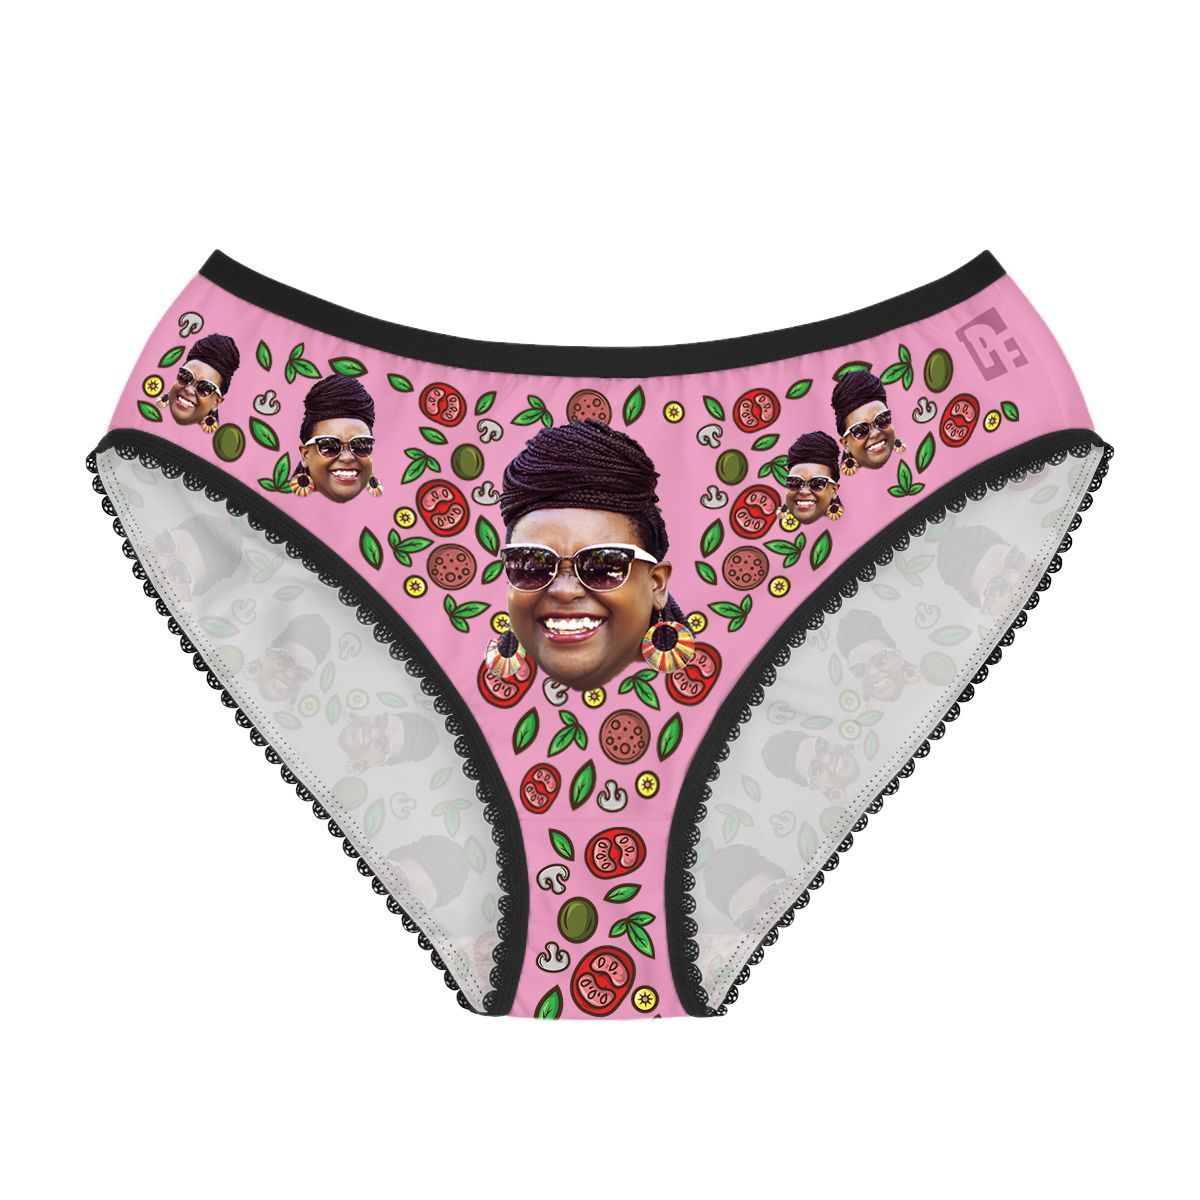 Pink Pizza women's underwear briefs personalized with photo printed on them